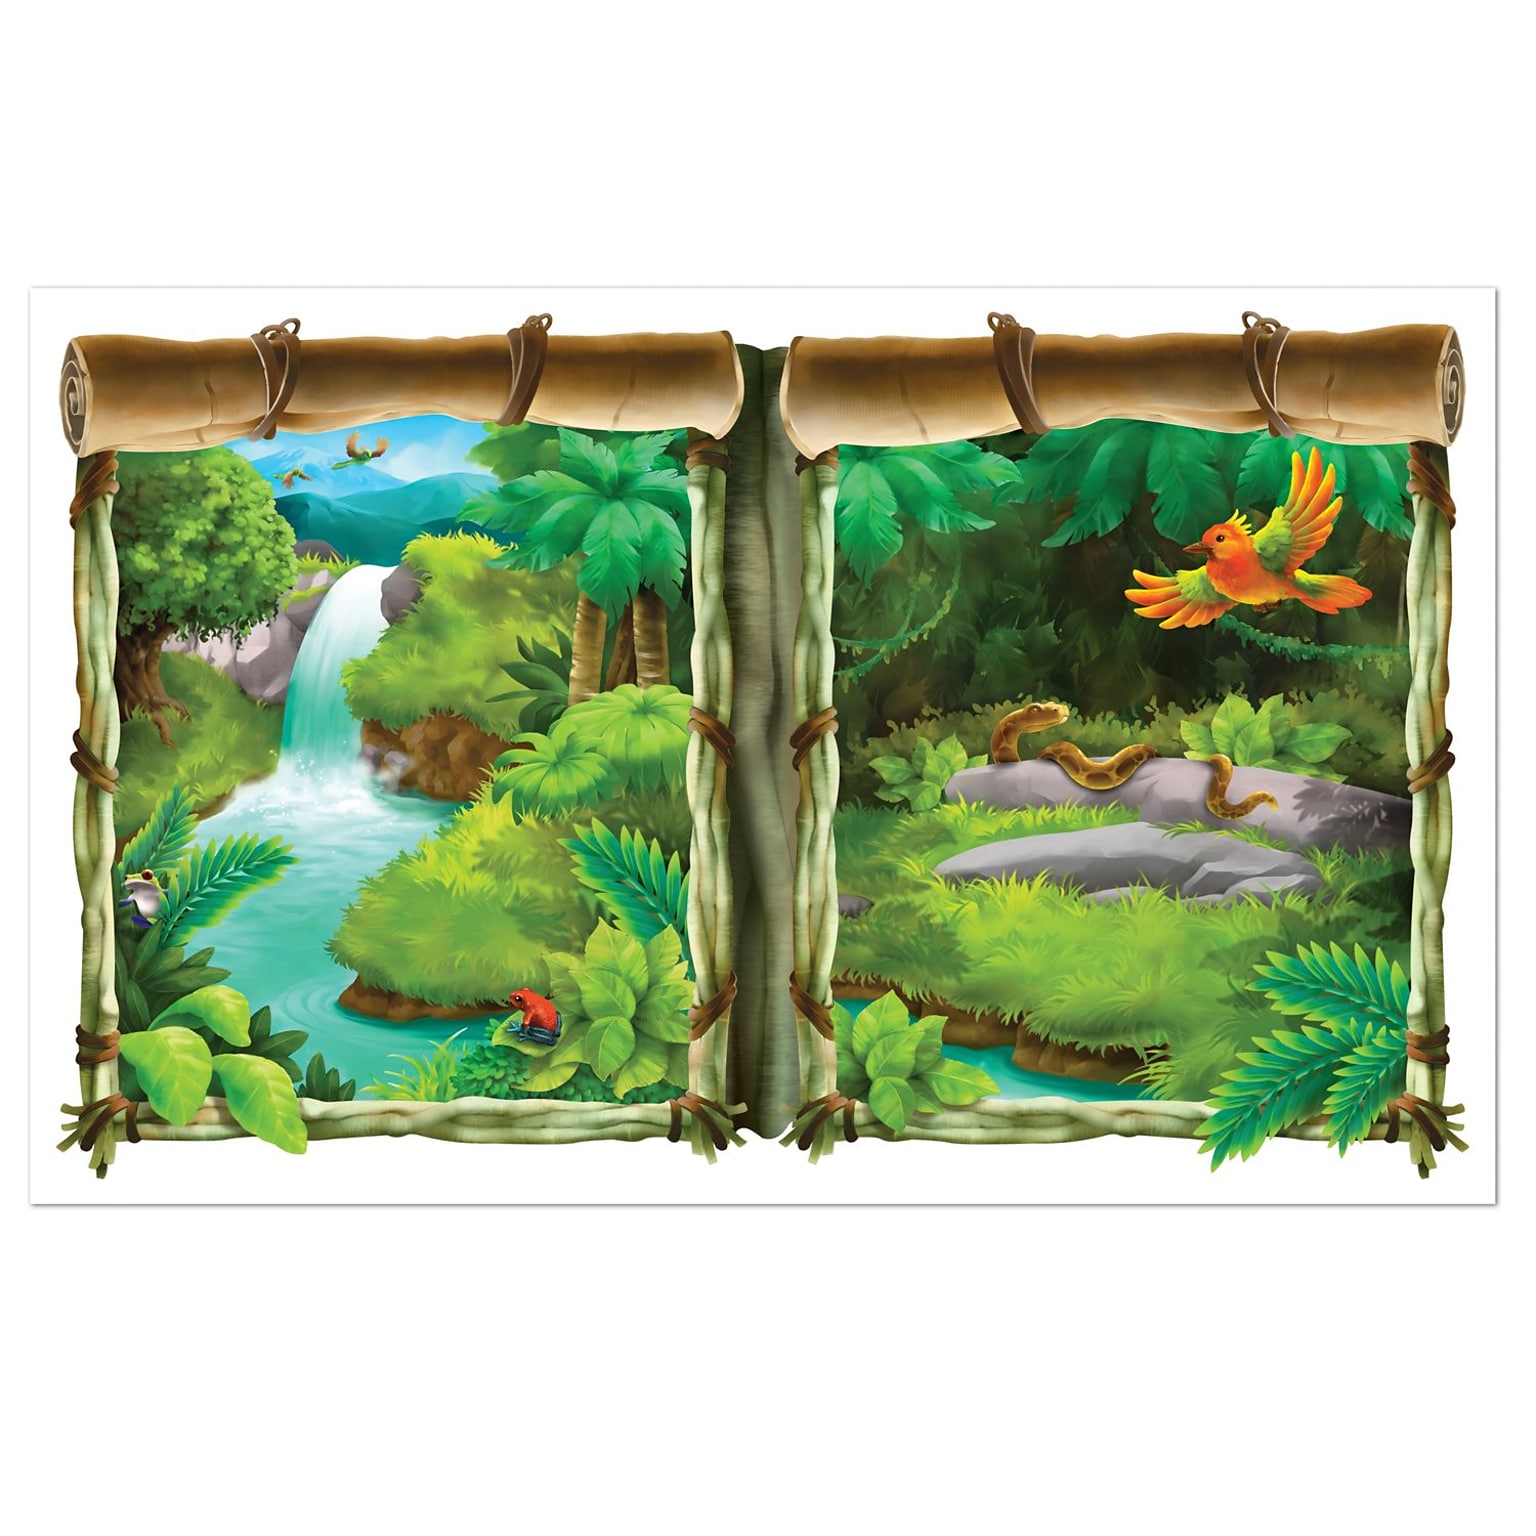 Beistle 3 2 x 5 2 Jungle Backdrop; 2/Pack